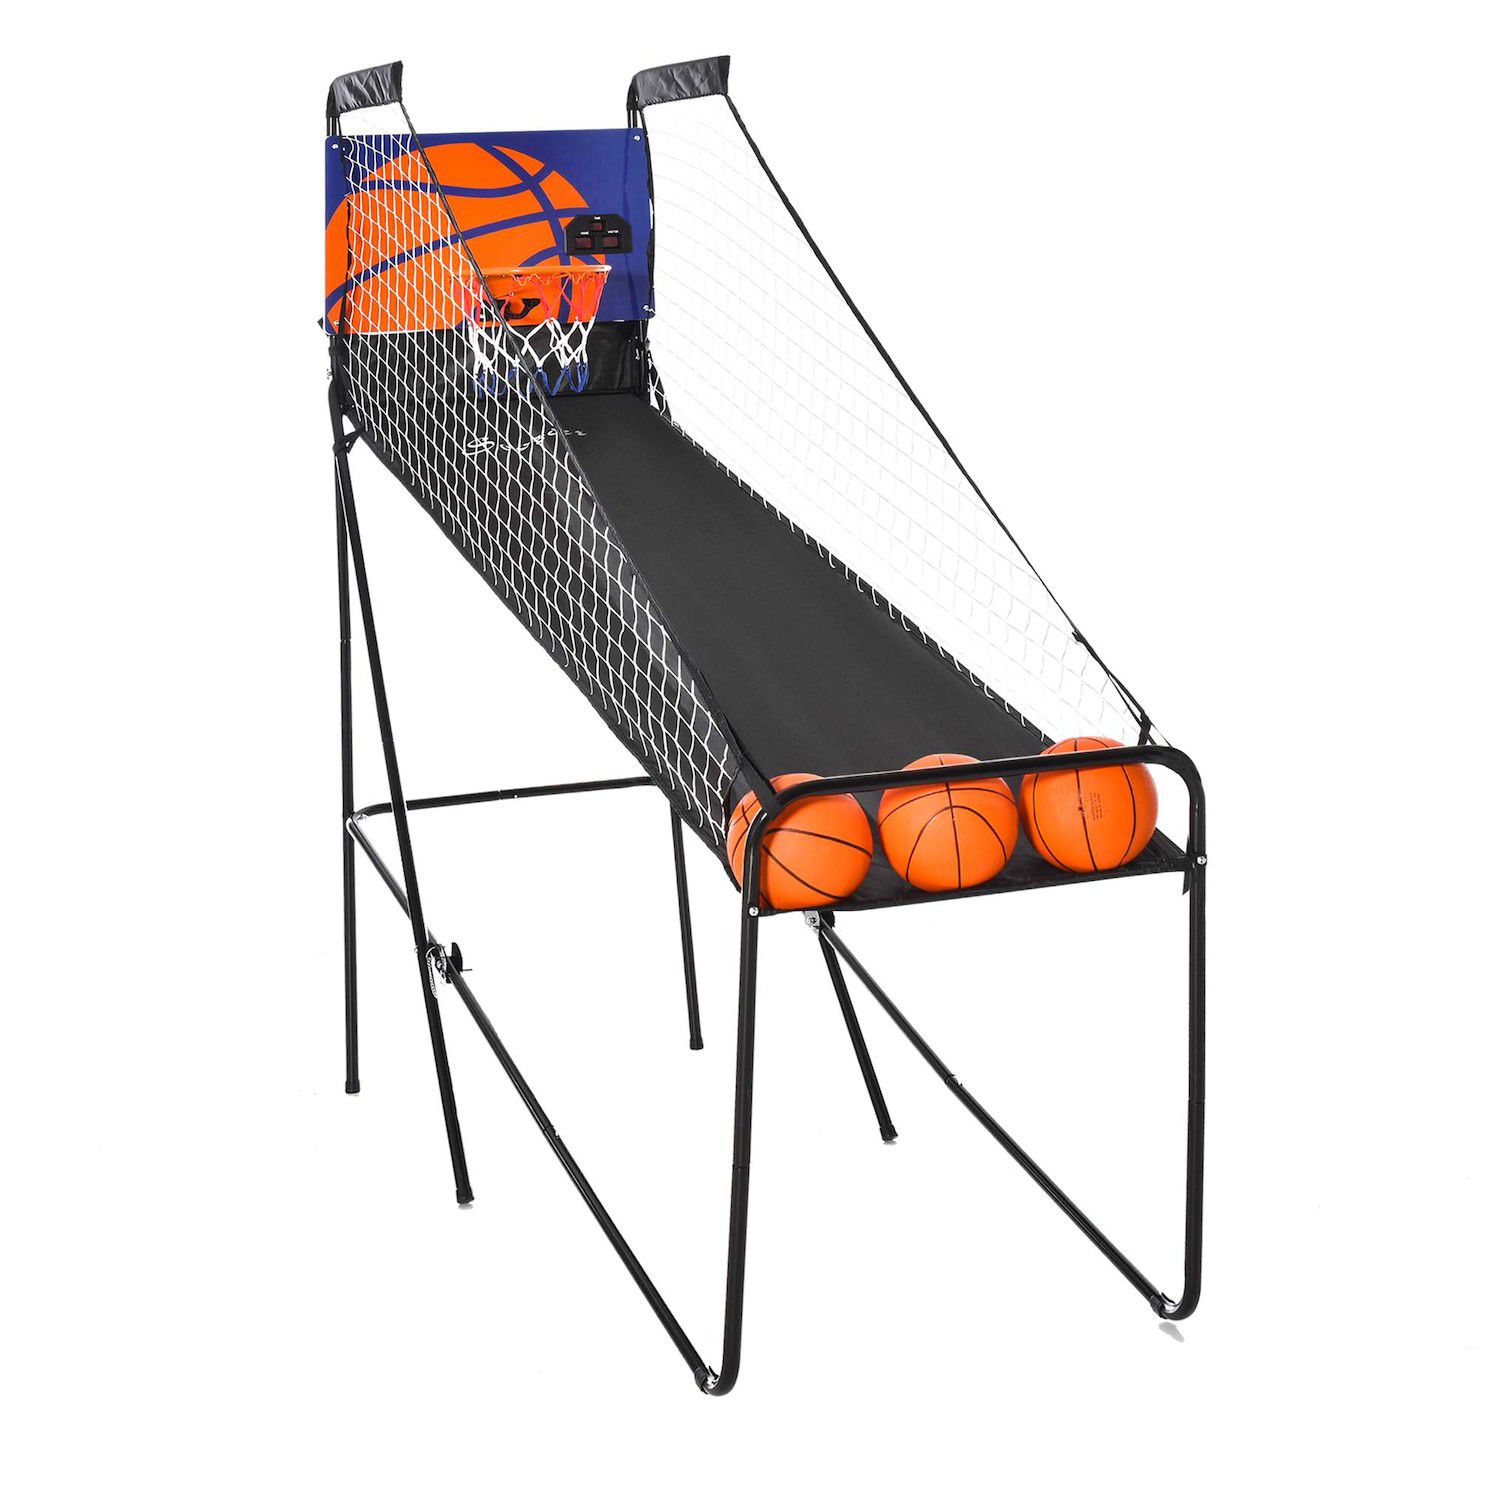 Lancaster Gaming Company Electric Indoor Basketball Game at